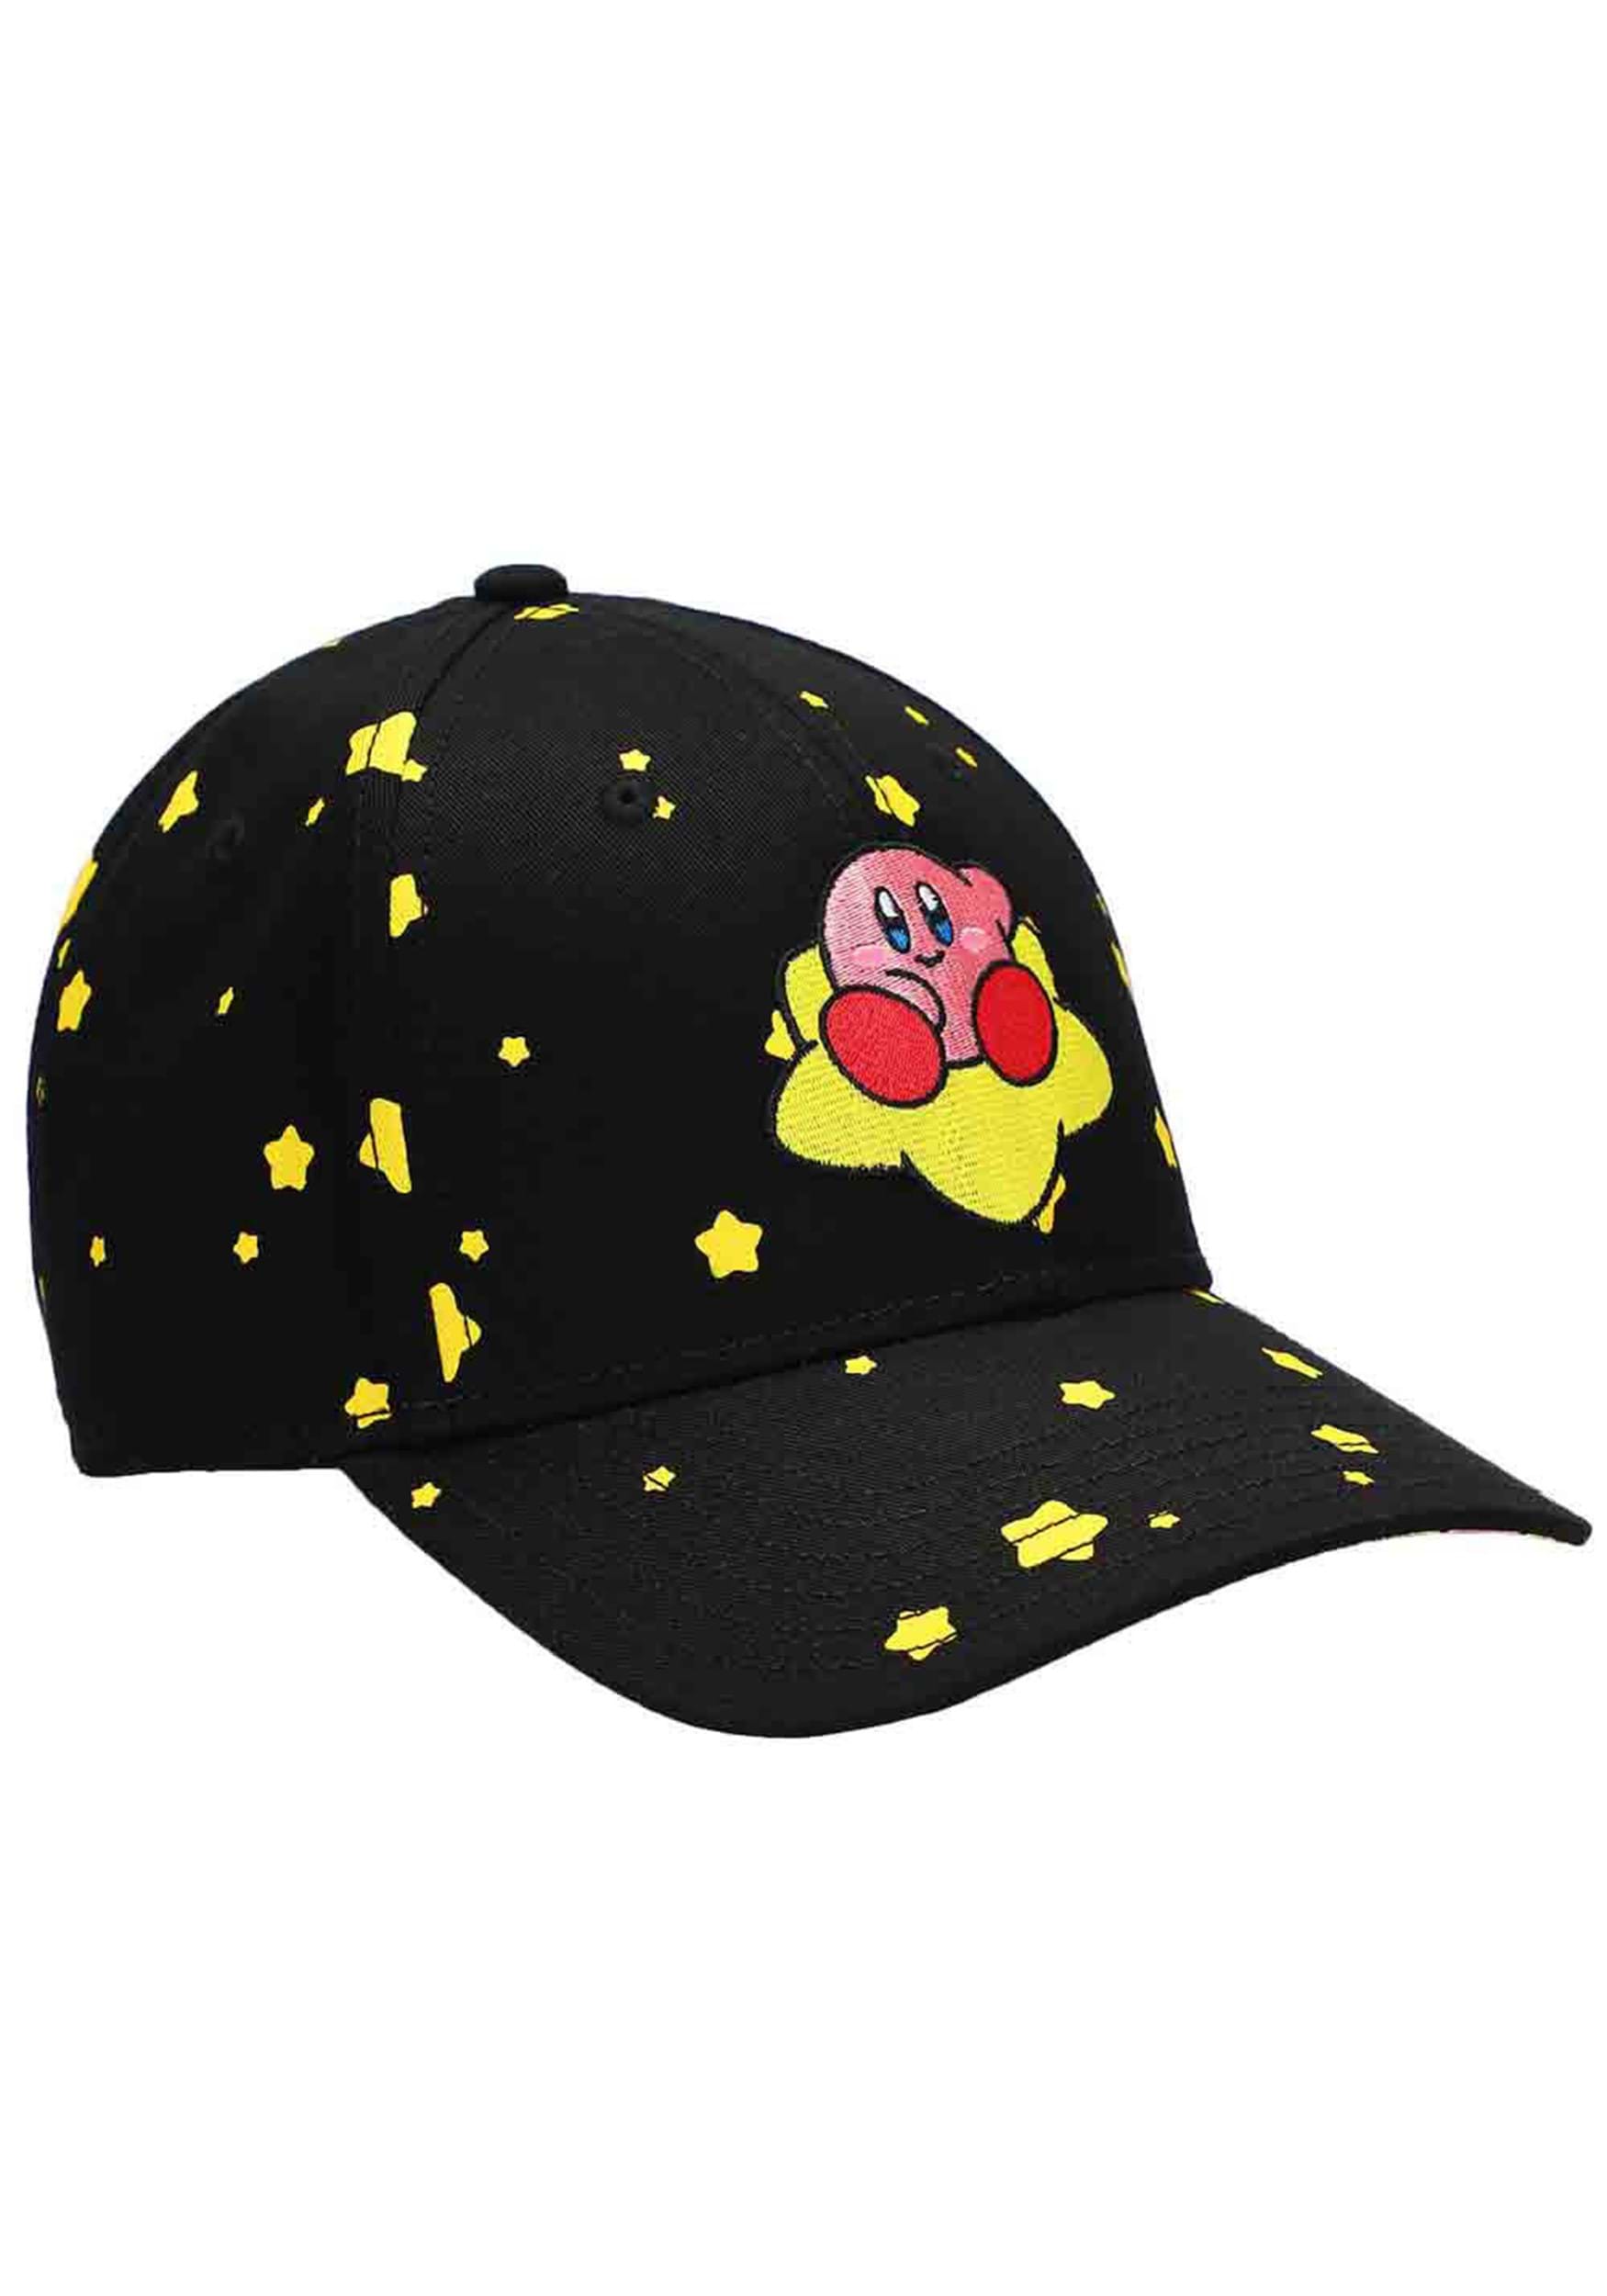 Embroidered Kirby Curved Bill Snapback Hat